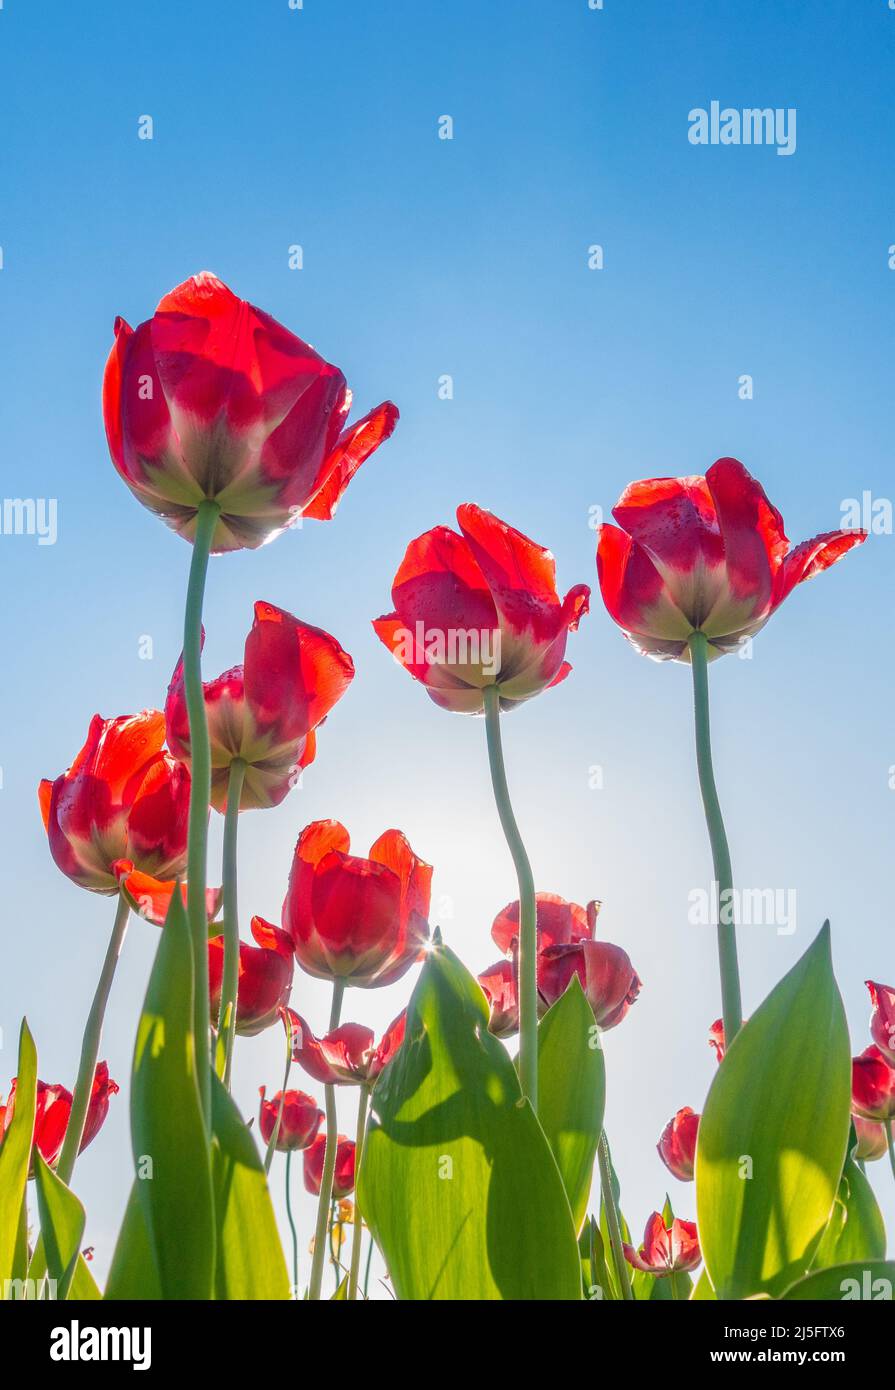 Red Tulips against a blue sky just after sunrise. Stock Photo